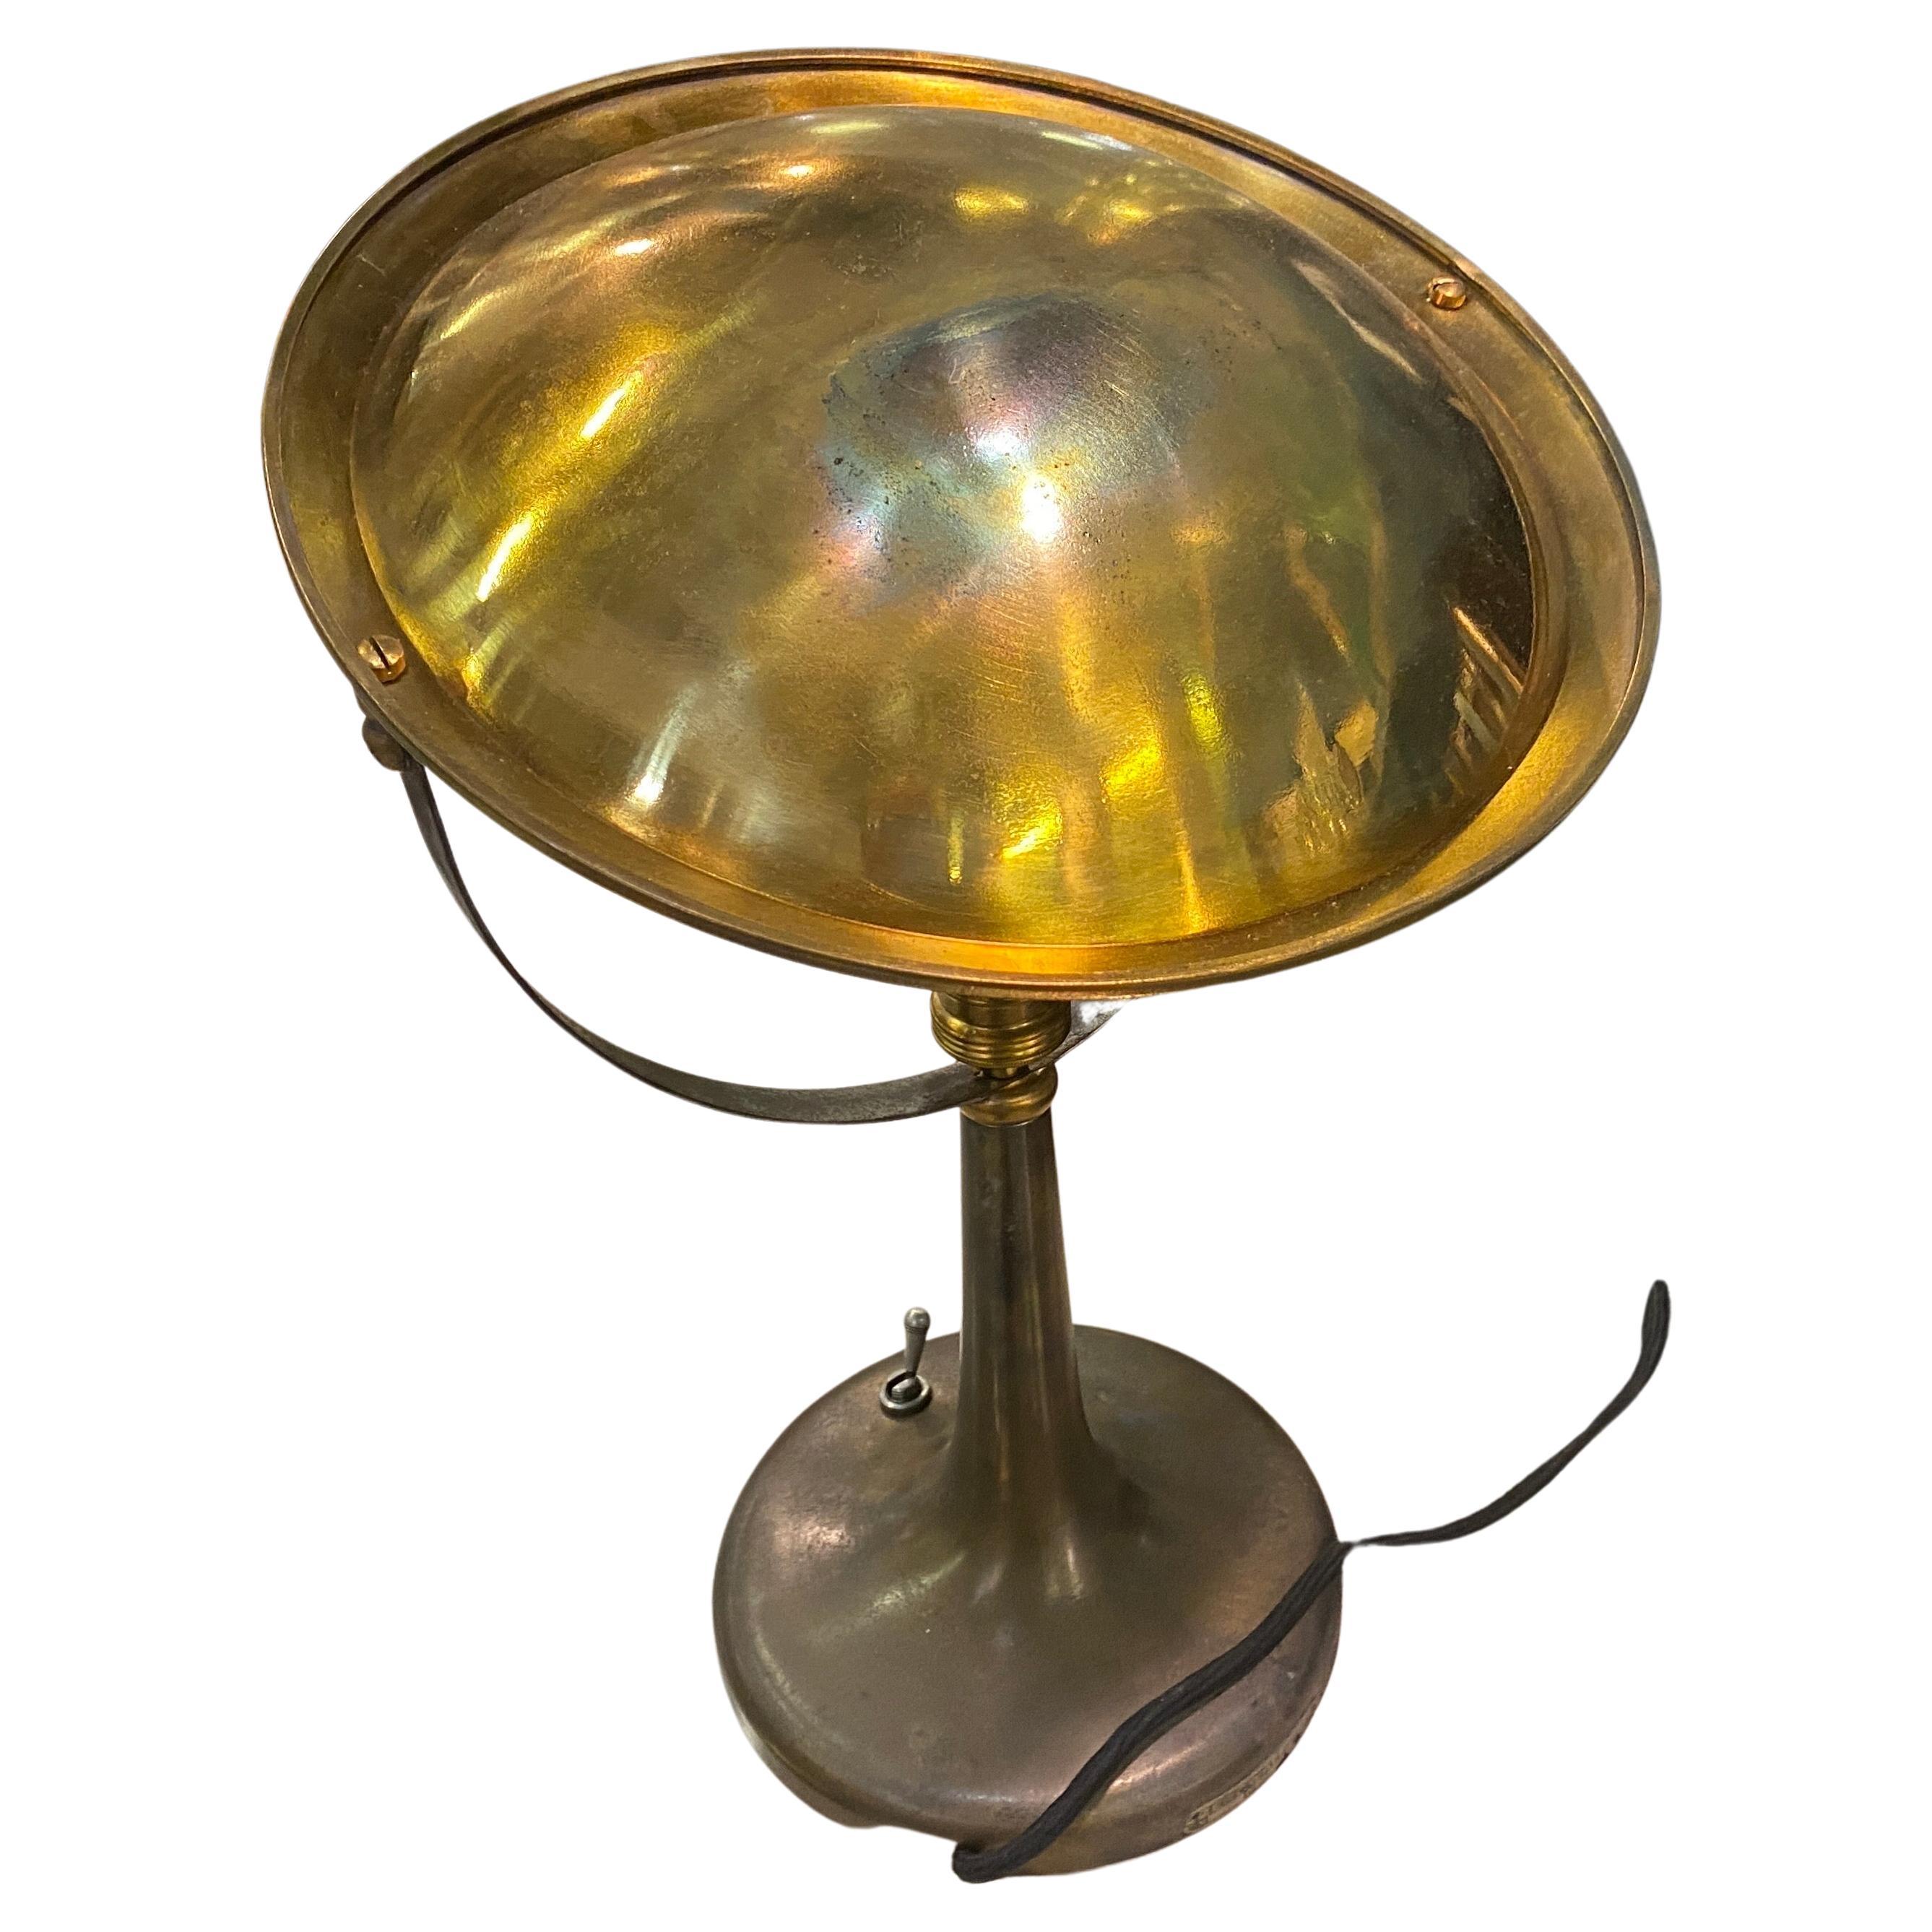 A stylish Mid-Century Modern adjustable brass table lamp designed and manufactured in Italy by Zerowatt in the Fifties. The table lamp it's in working order with original vintage electrical system, it works both 110-240 volts and needs a regular e27